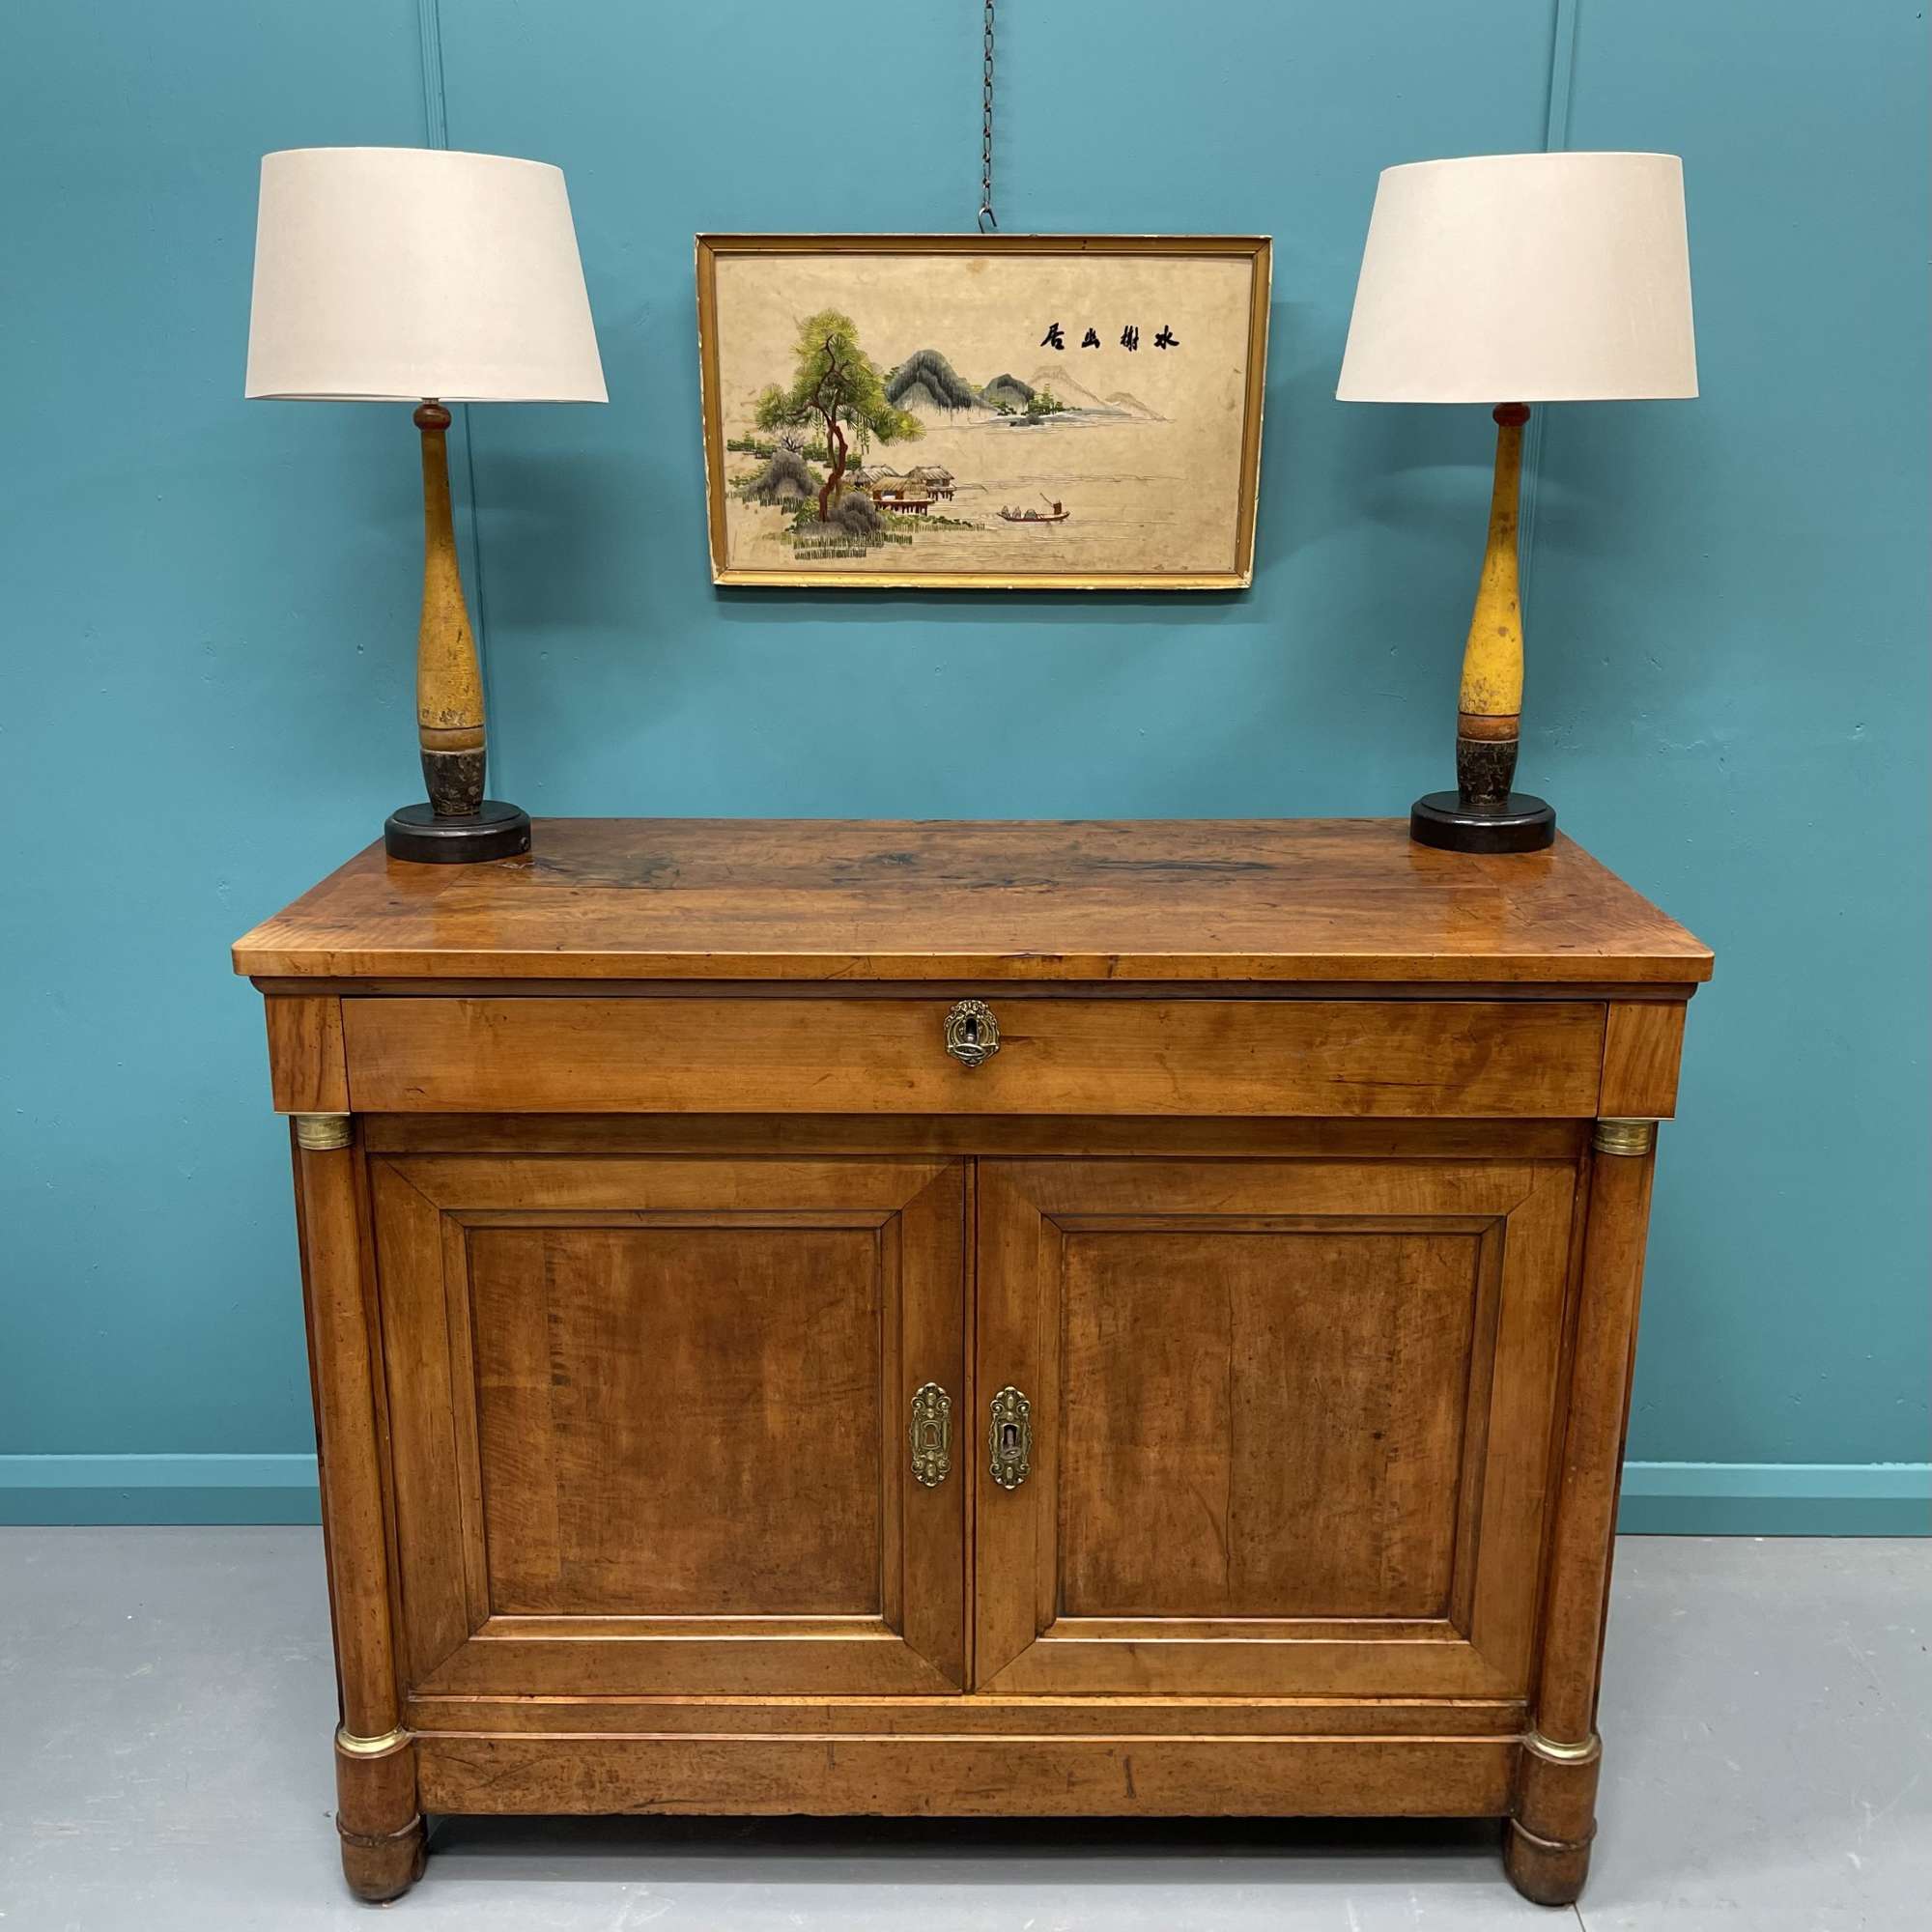 18th century French pear woof buffet sideboard